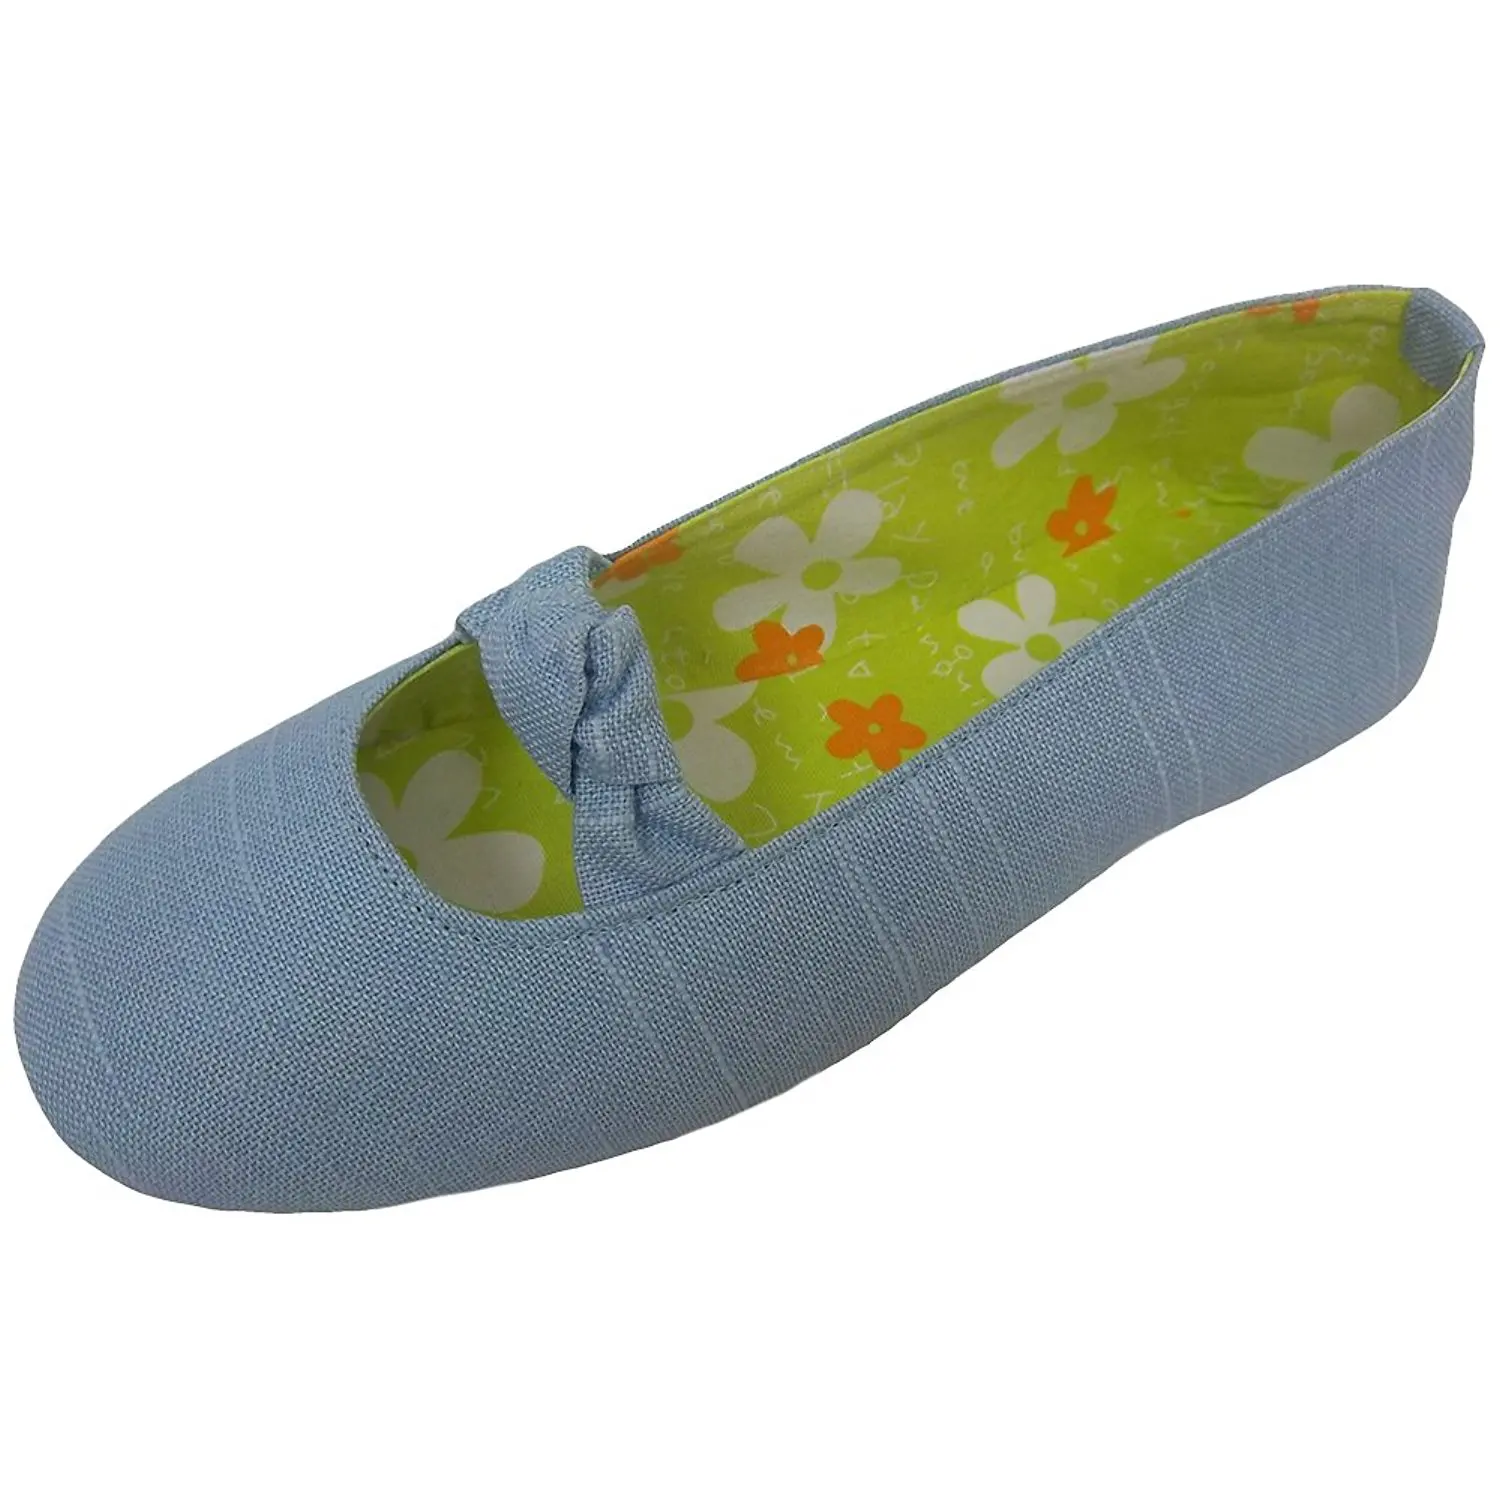 tender tootsies slippers by clinic comfort system